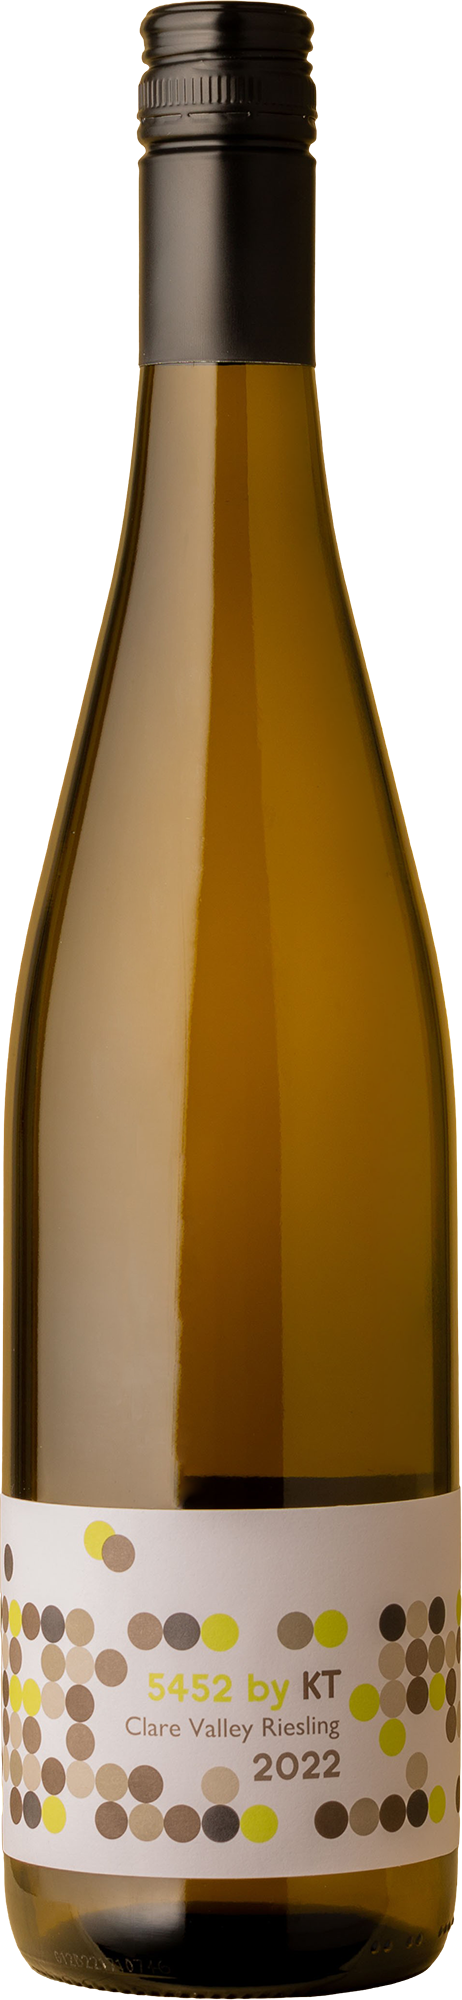 Wines By KT - Watervale Riesling 5452 2022 White Wine